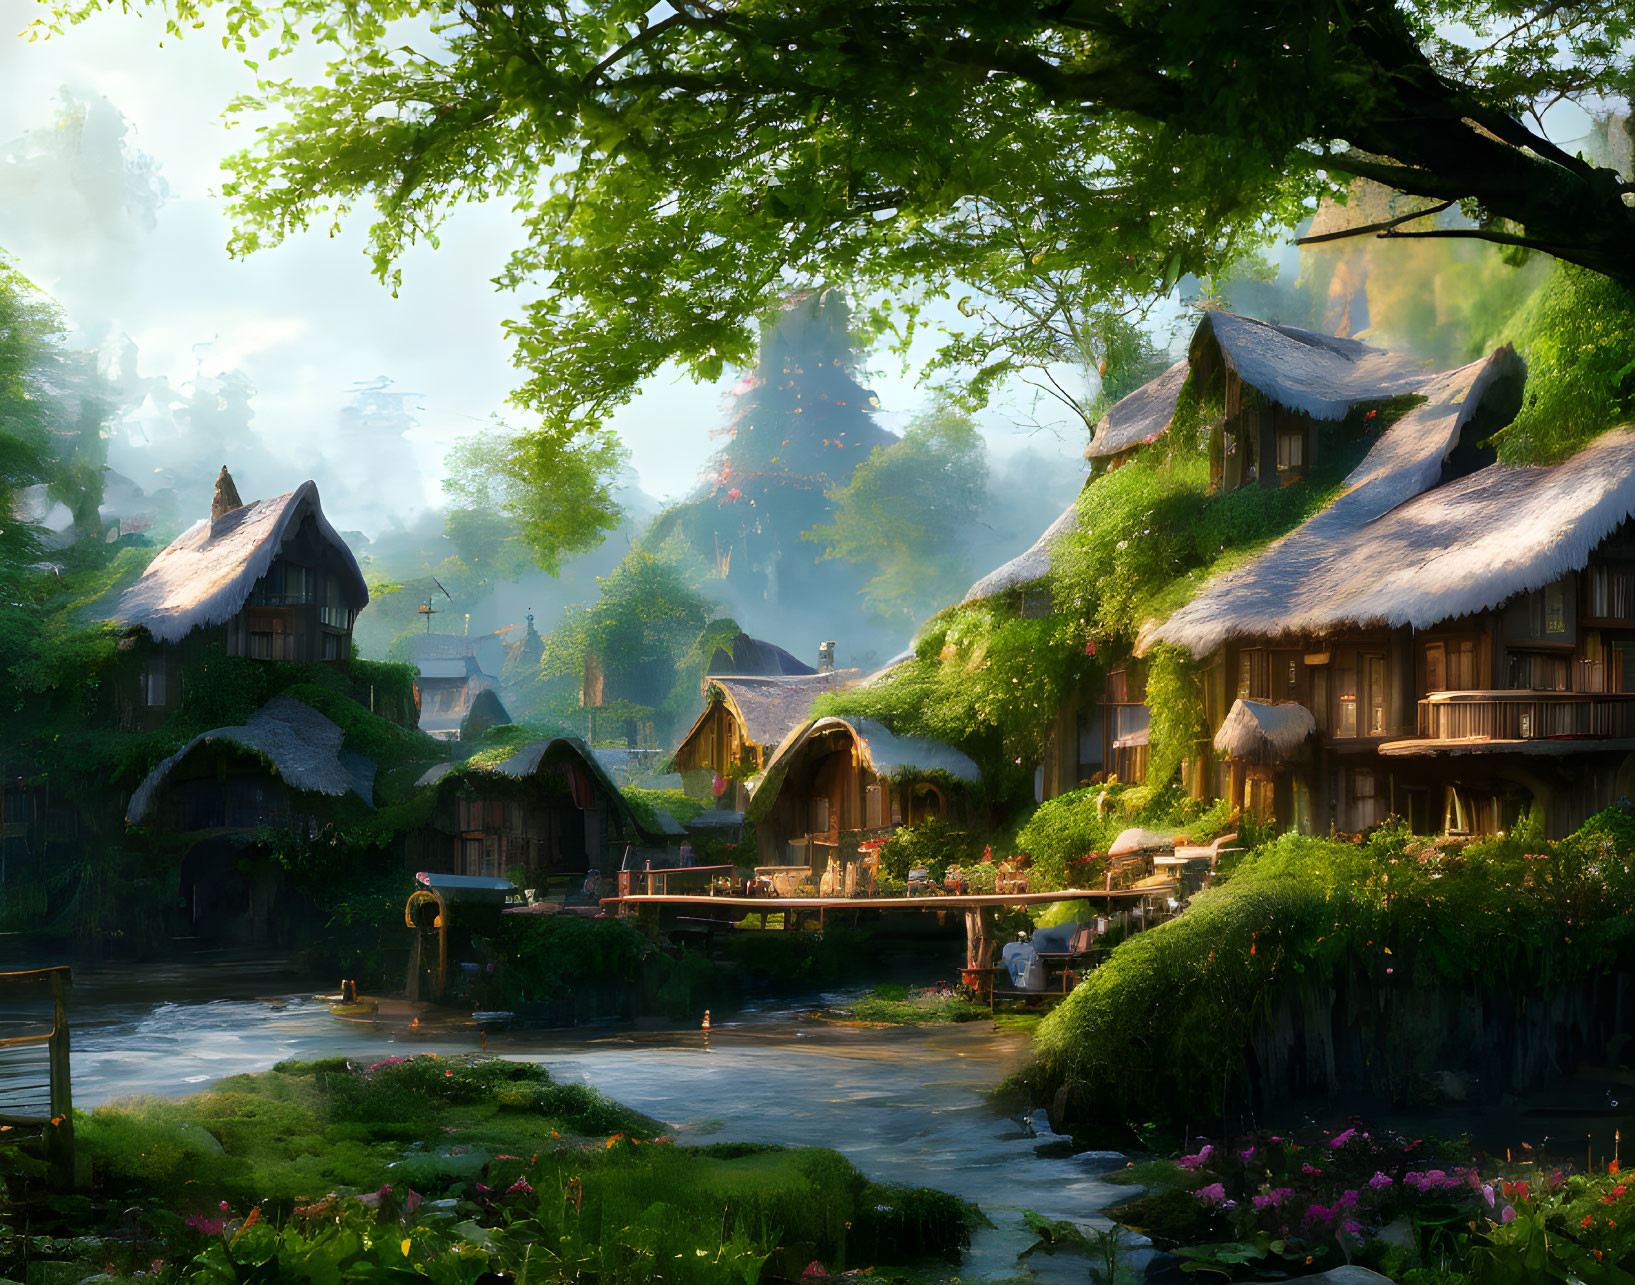 A beautiful elven village on the edge of an ancien